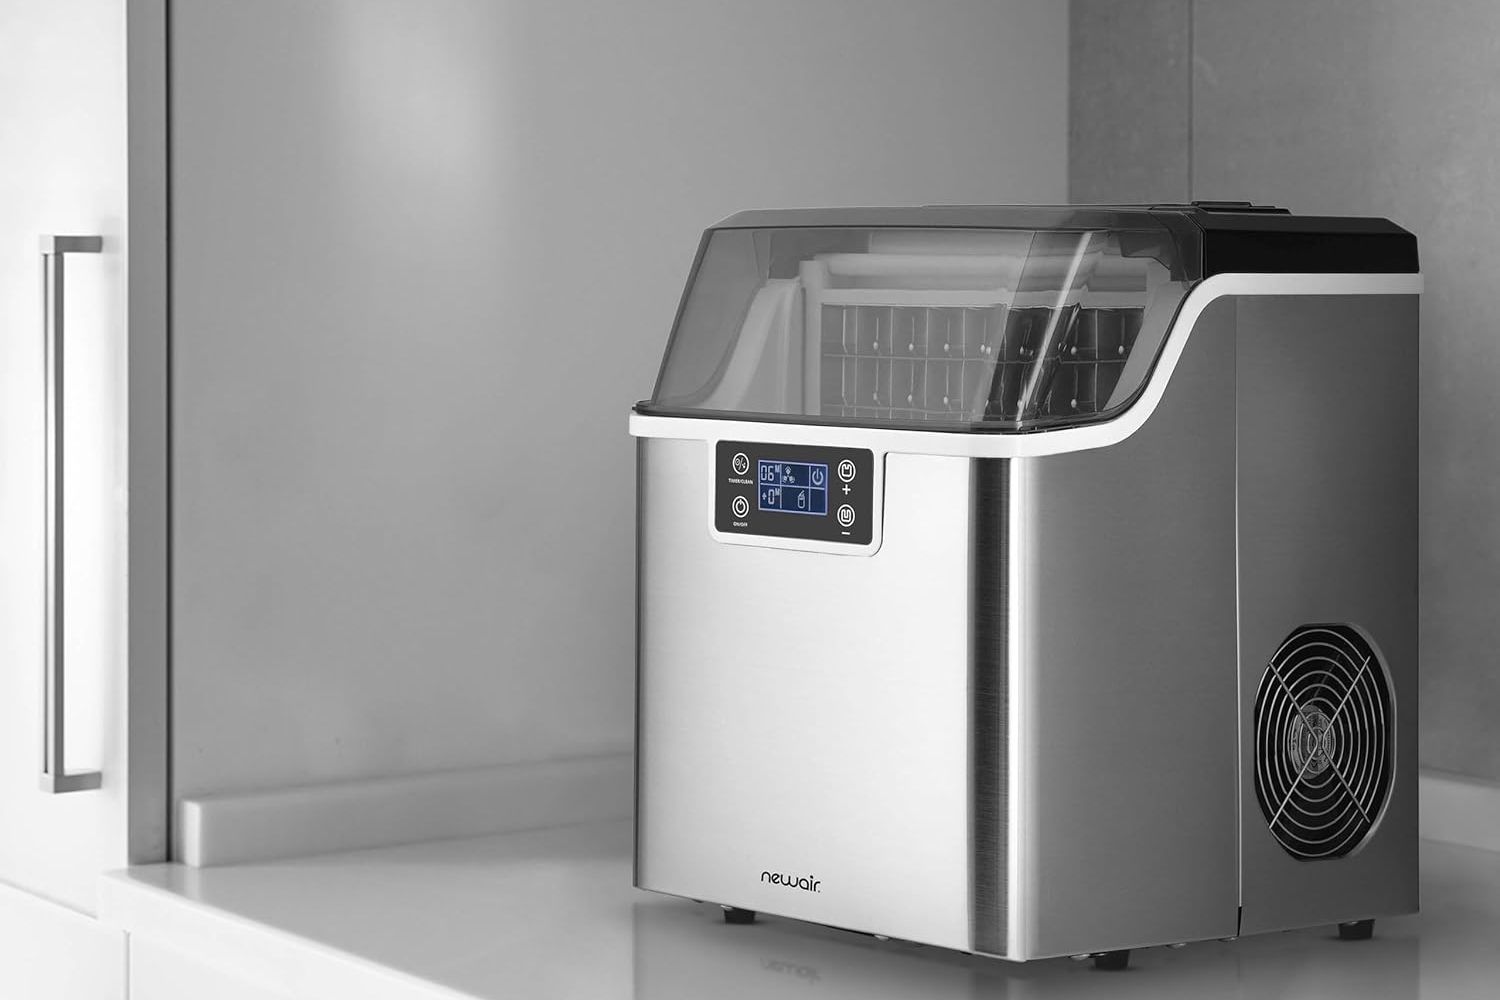 The Newair Countertop Clear Ice Maker on a kitchen counter next to a refrigerator.